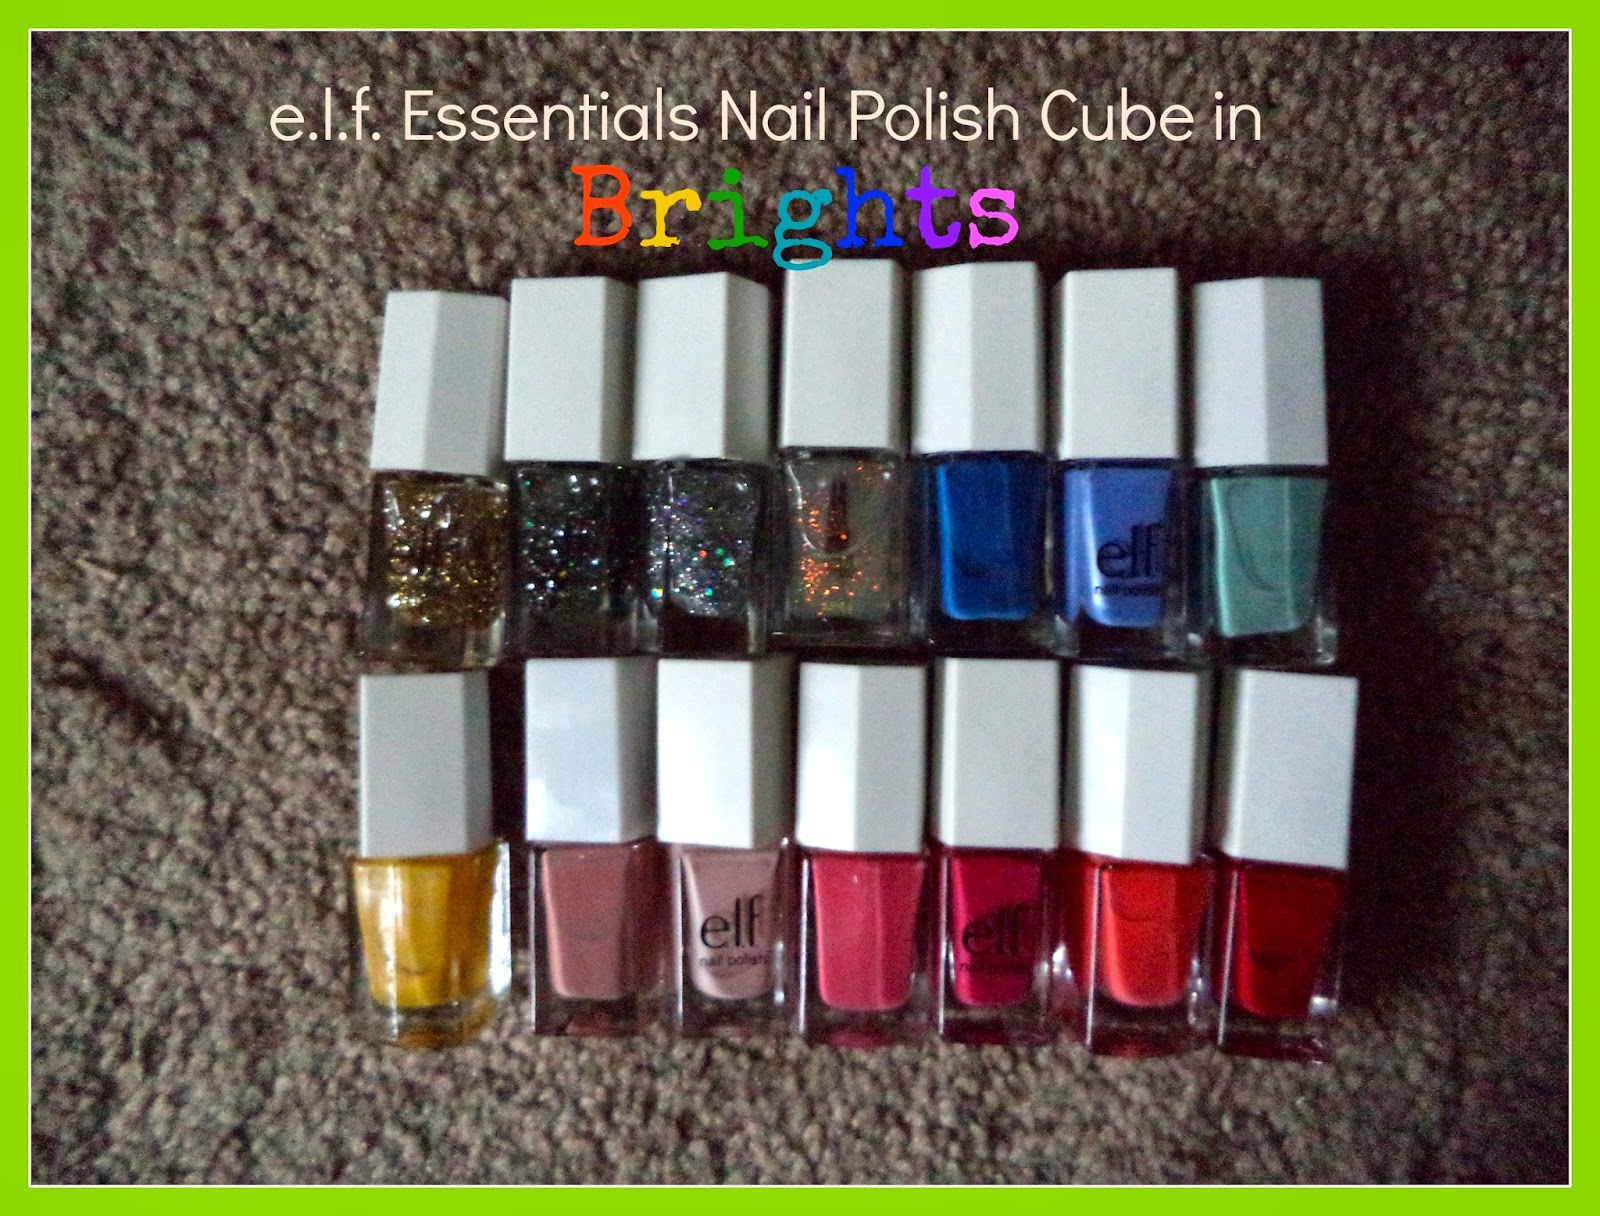 e.l.f. Cosmetics Holiday 14-piece Nail Cube - Limited Edition - Reviews |  MakeupAlley